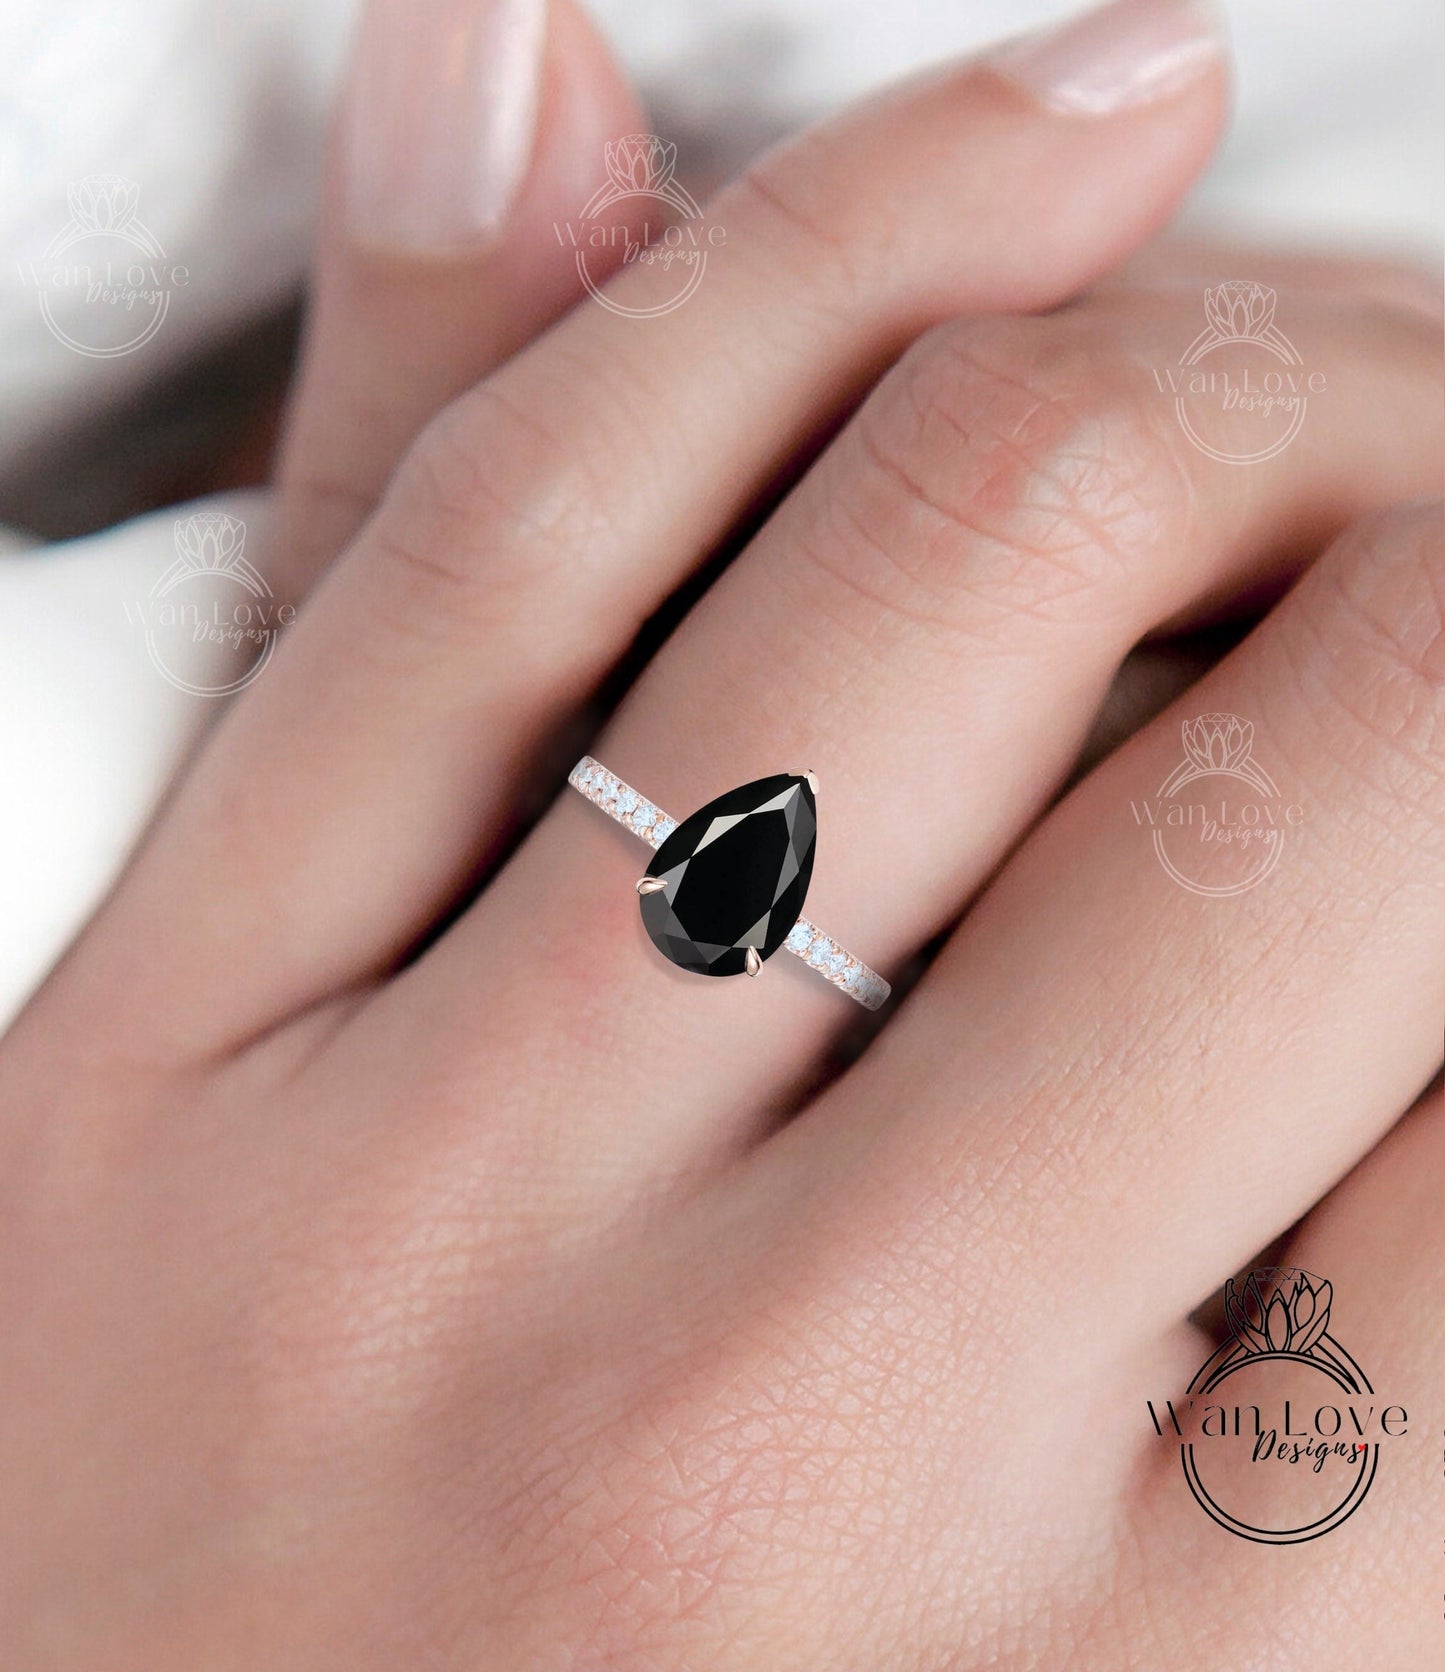 Pear cut black spinel diamond engagement ring Vintage Moissanite solitaire Bridal ring Antique diamond wedding ring Promise Anniversary gift Wan Love Designs